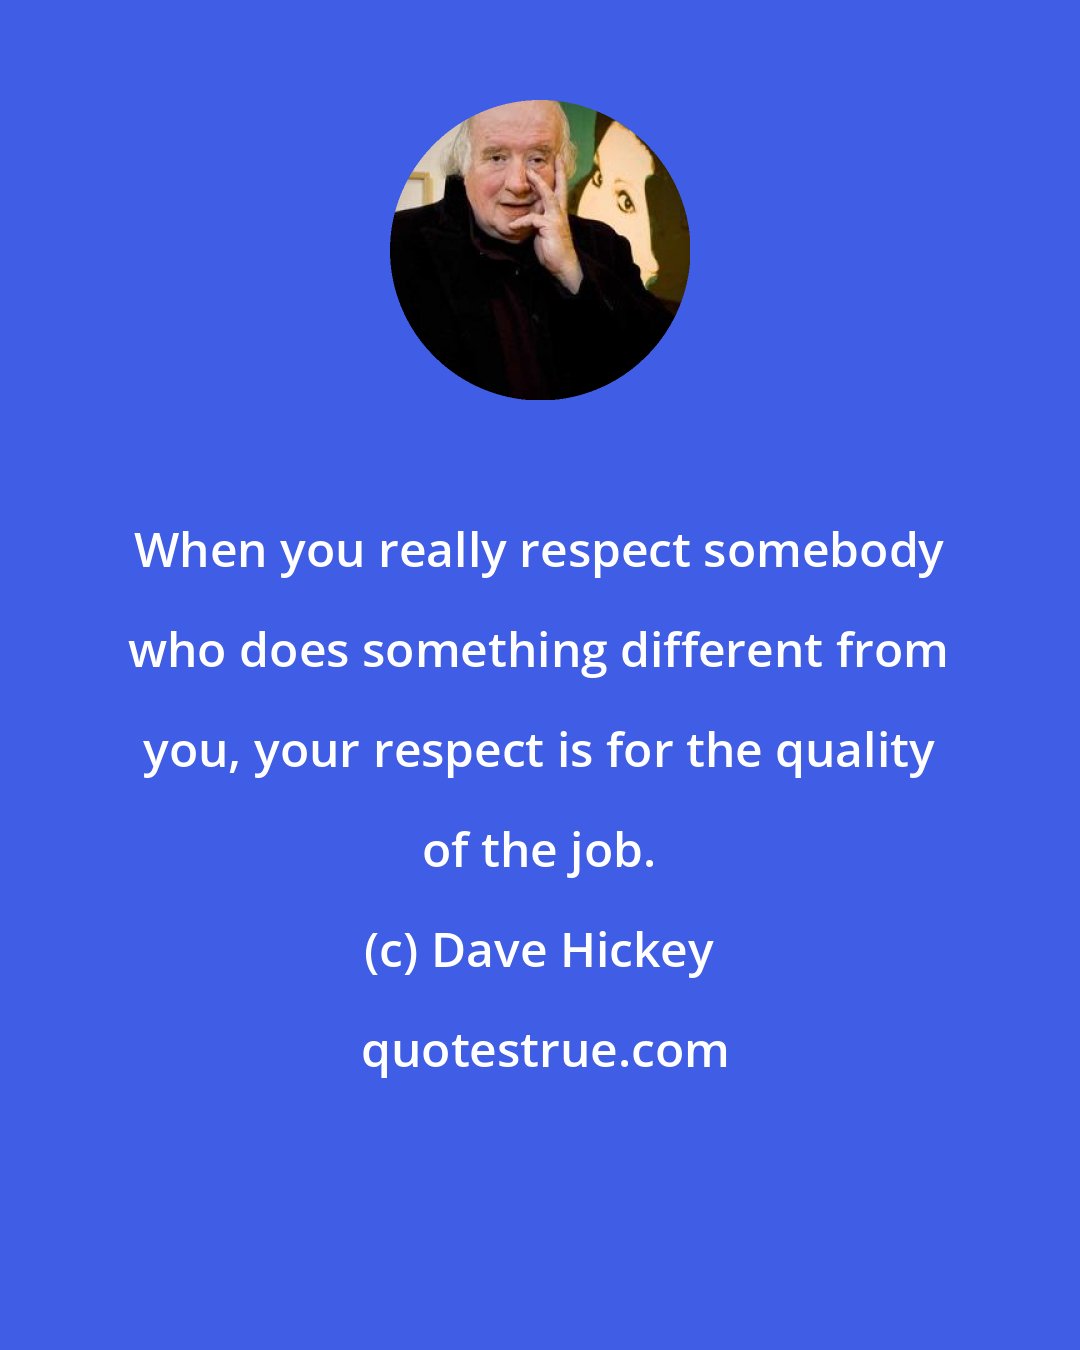 Dave Hickey: When you really respect somebody who does something different from you, your respect is for the quality of the job.